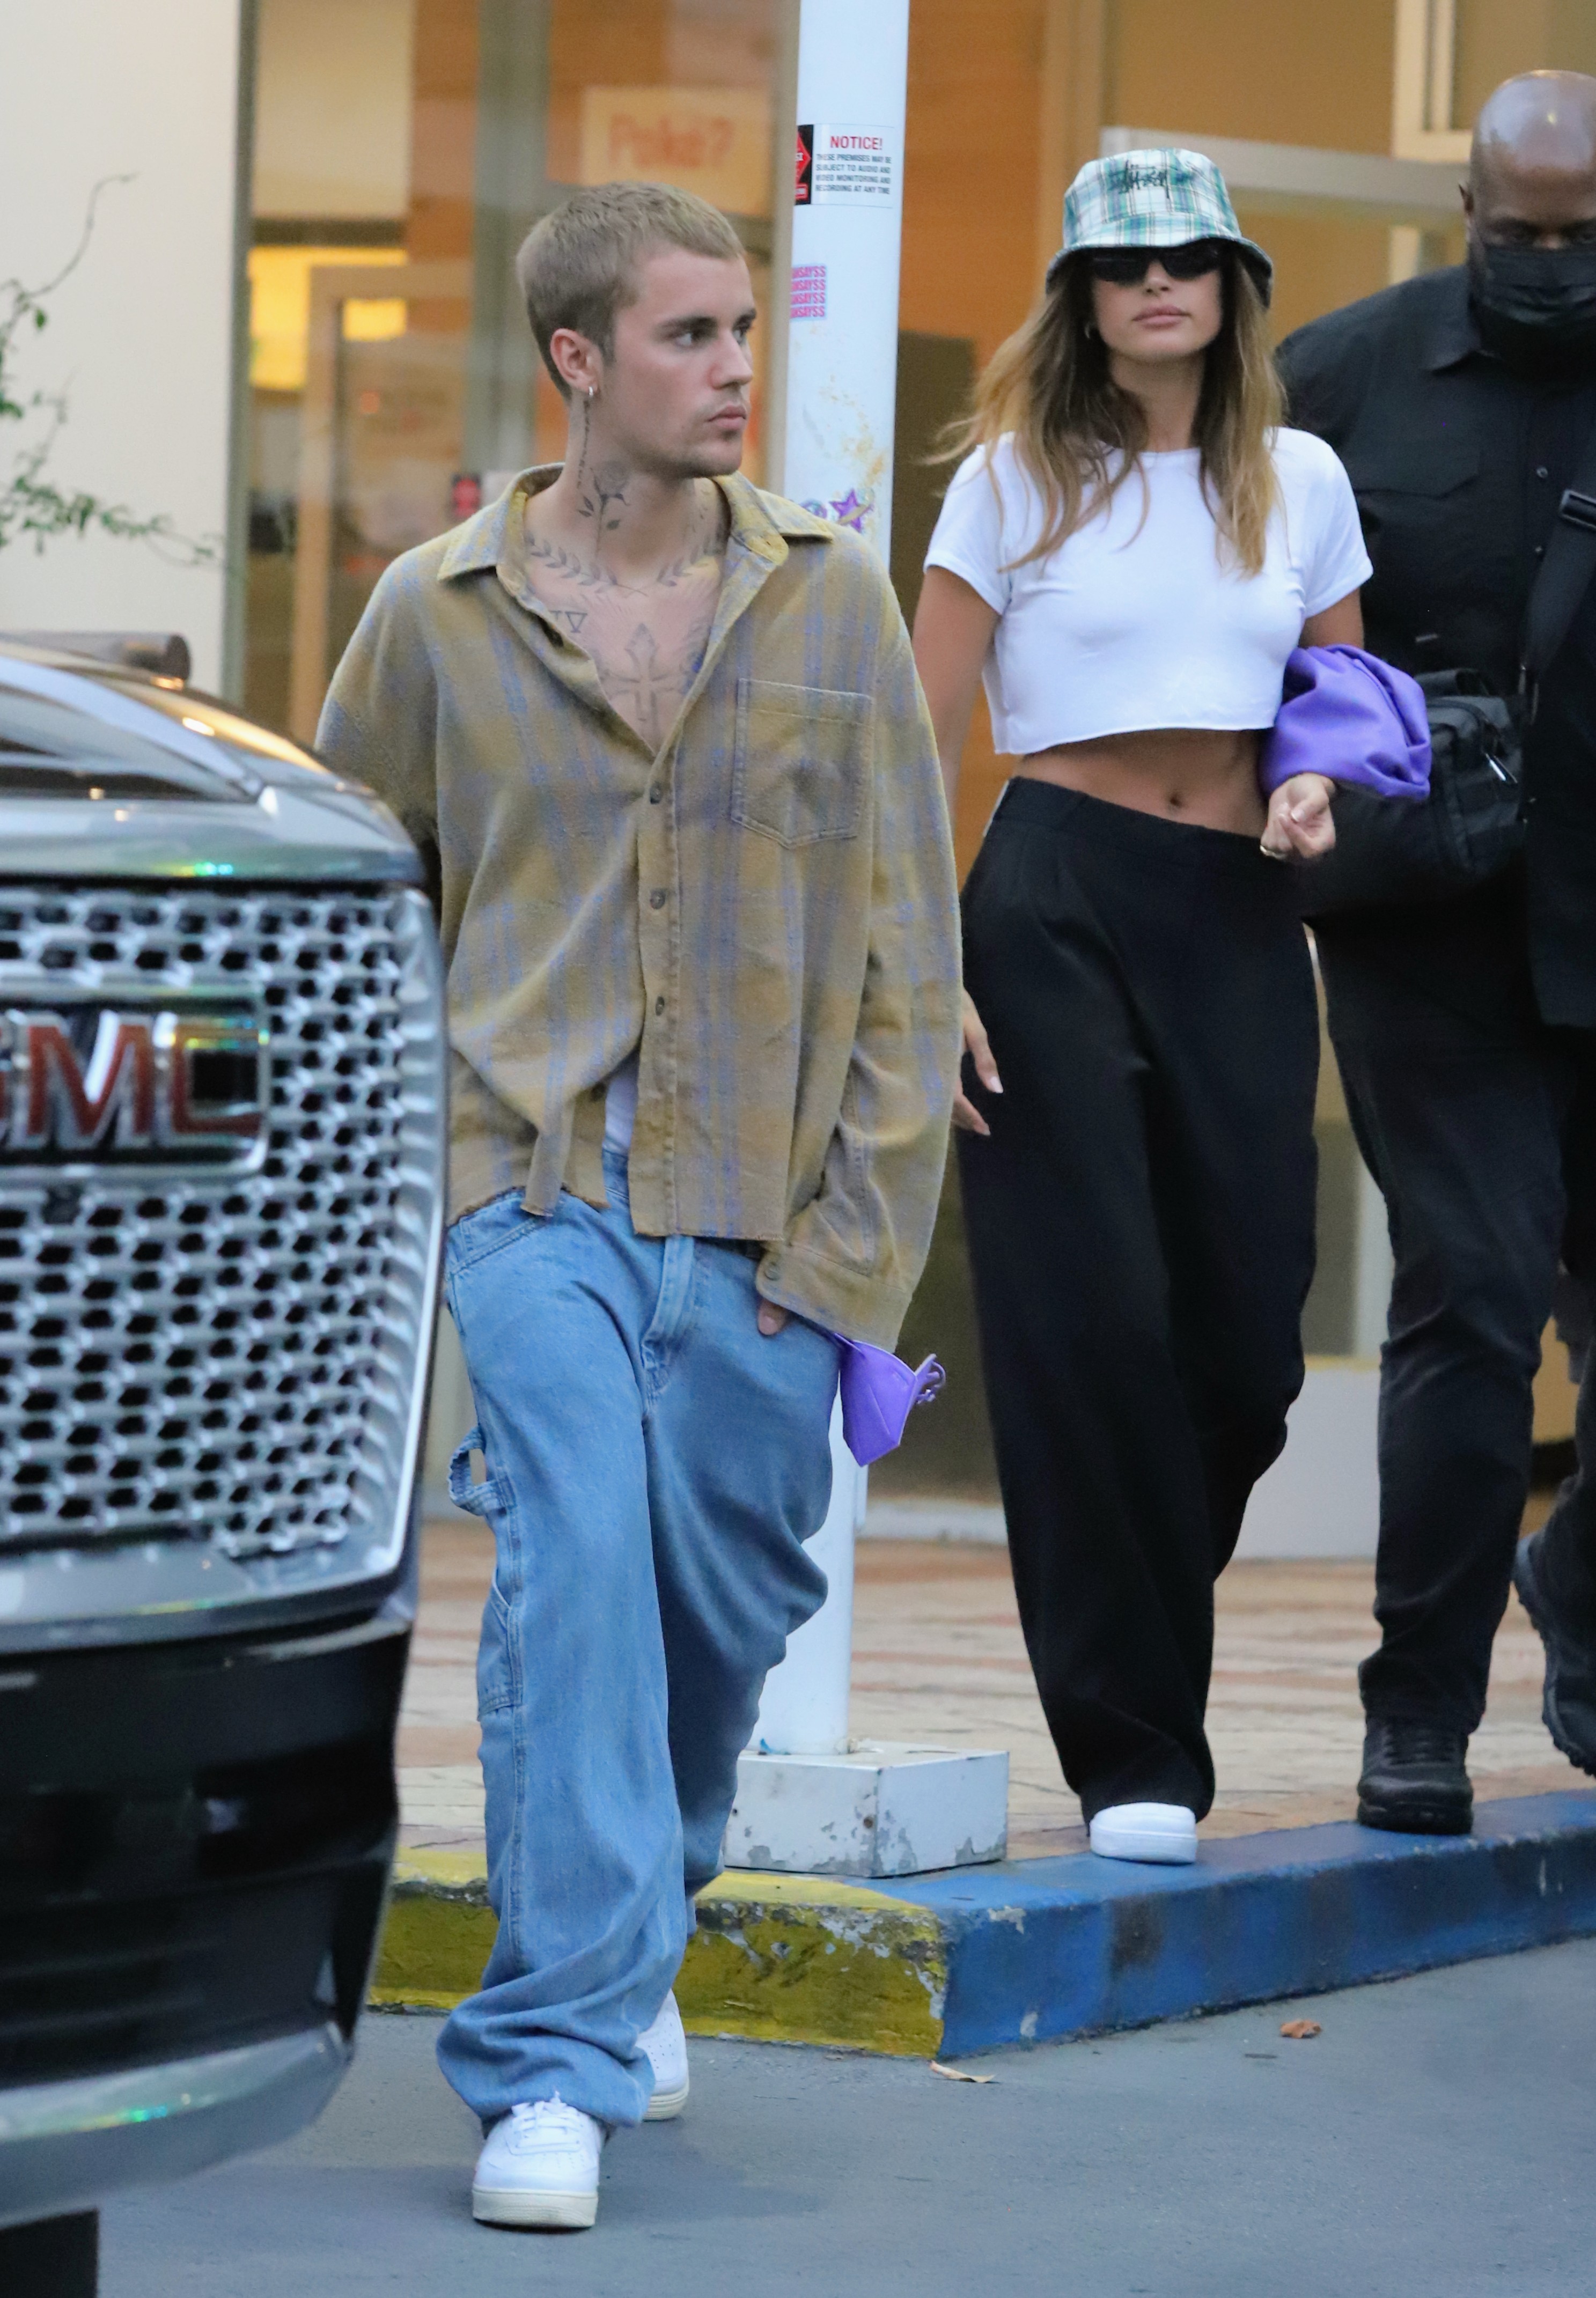 Hailey Bieber Rocks Crop Top With Justin As They Hold Hands On Date –  Hollywood Life